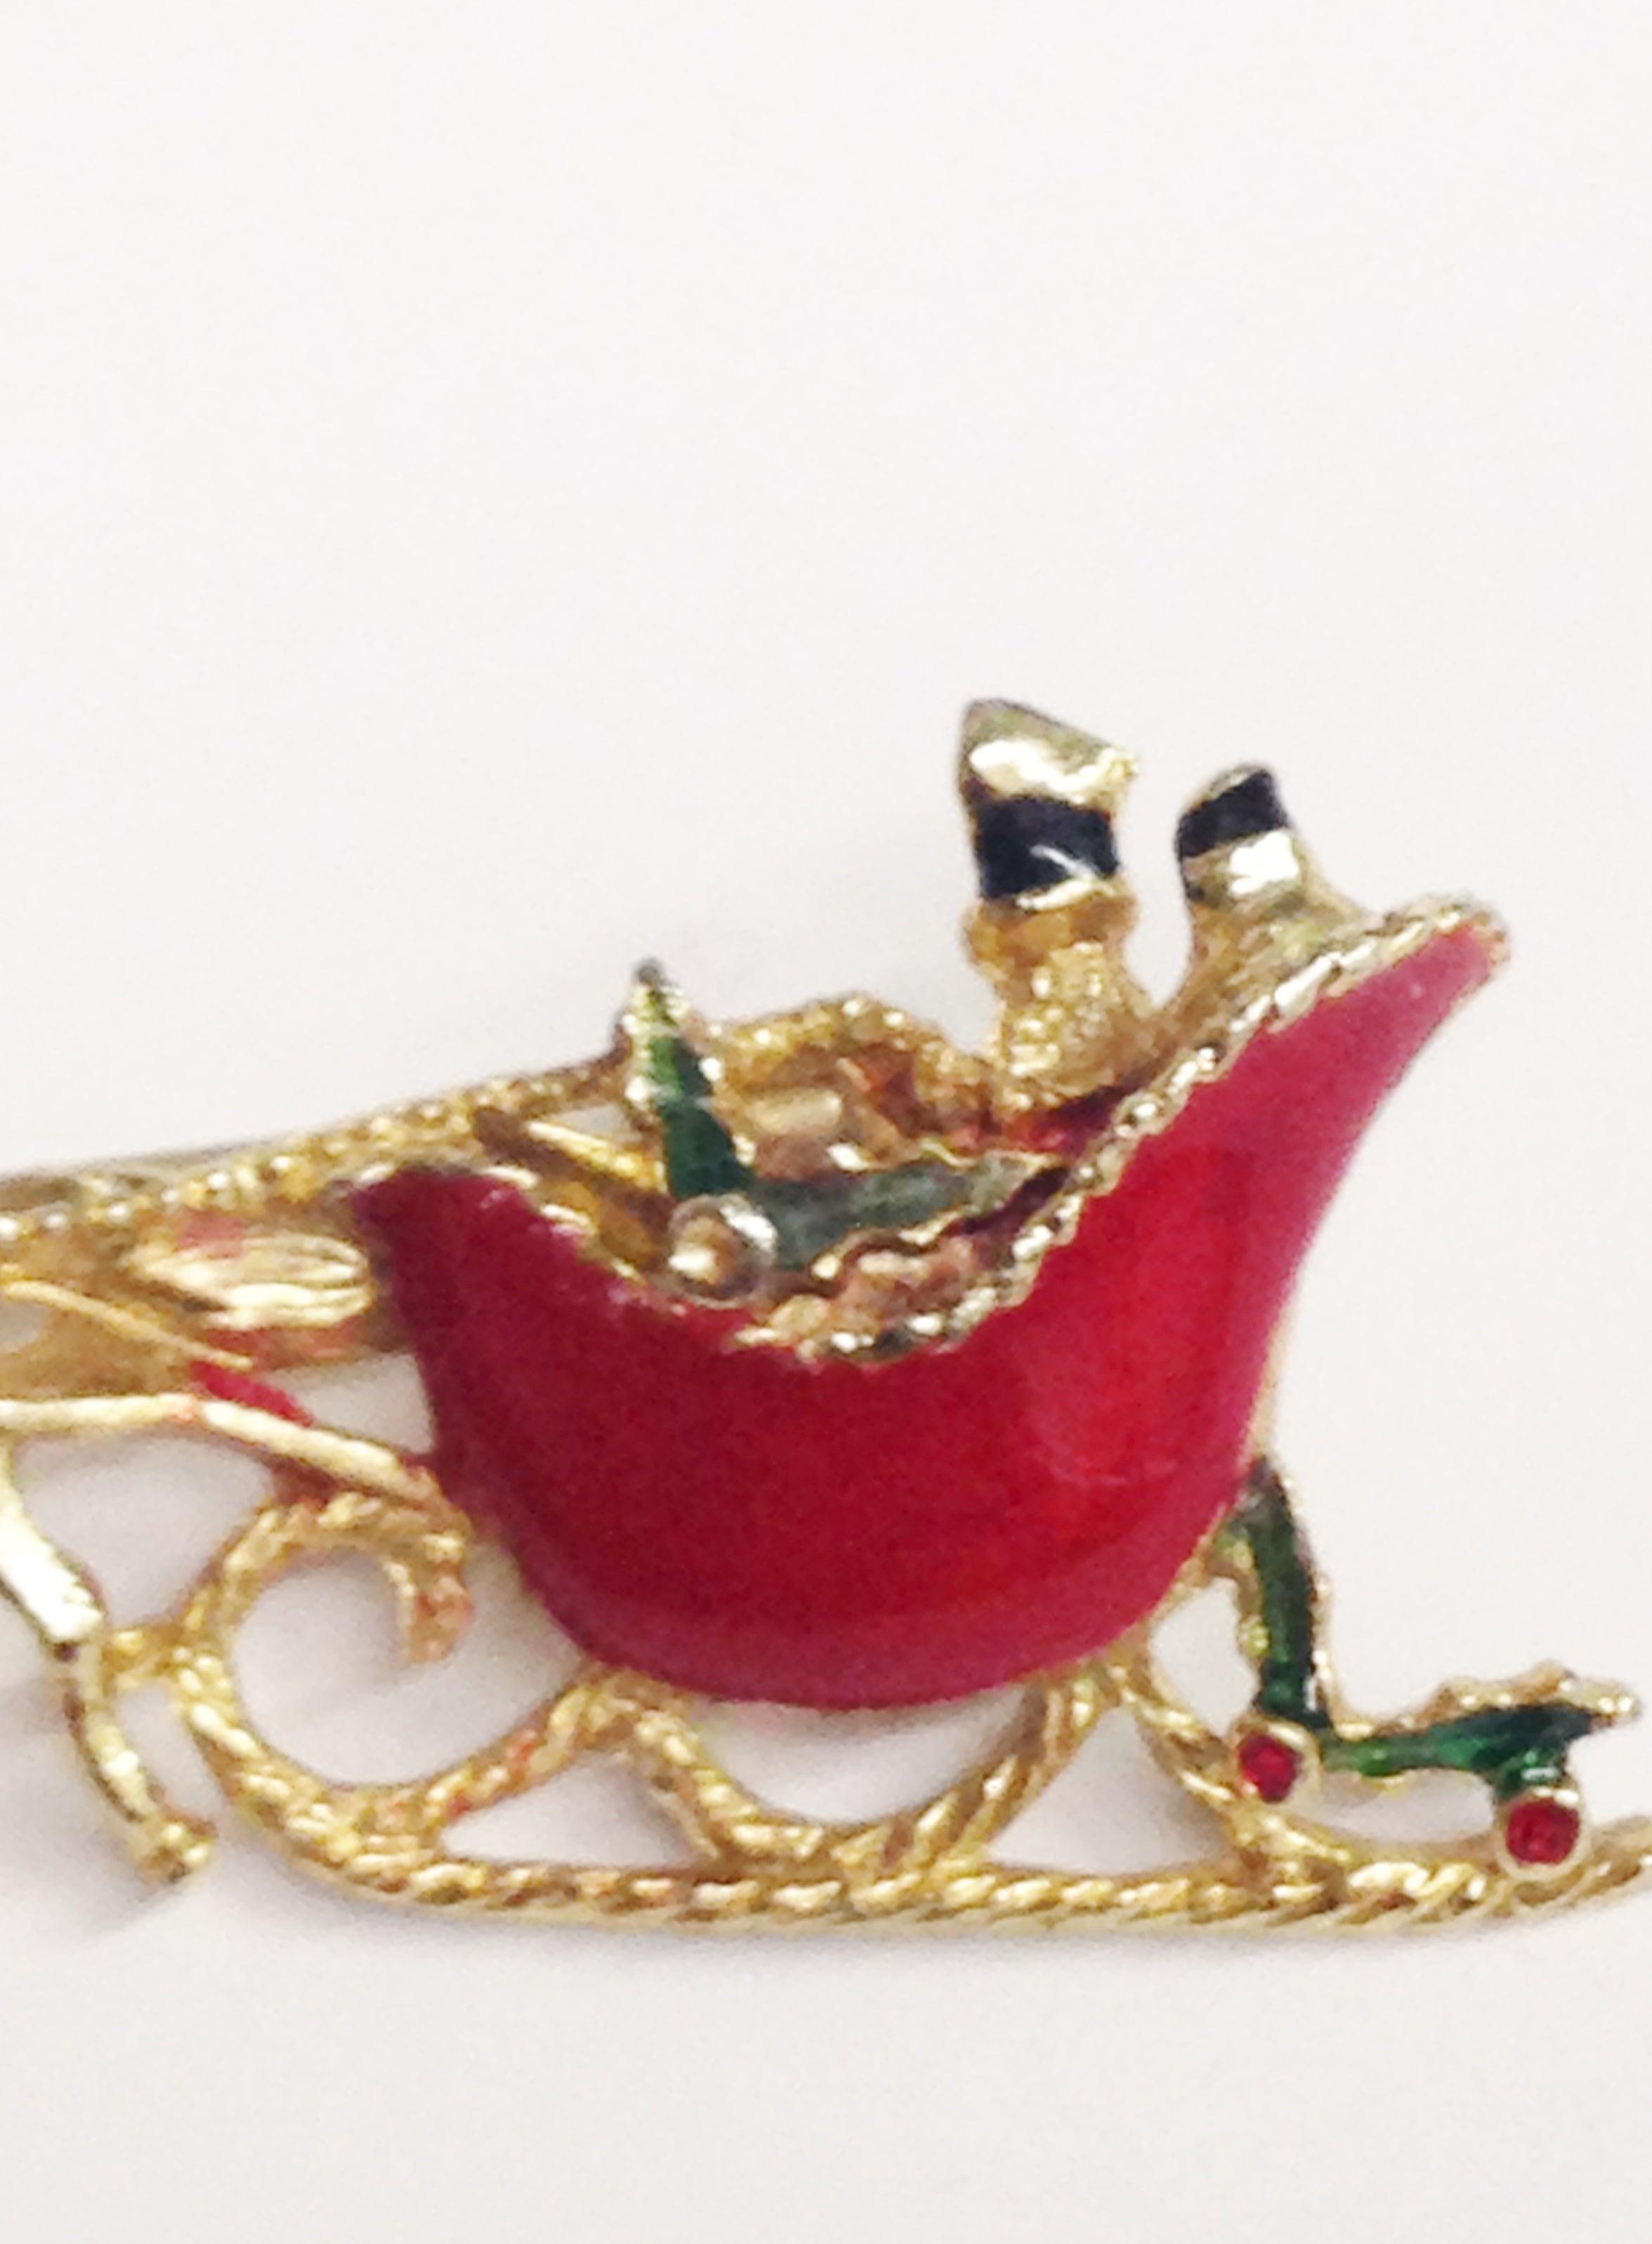 Vintage Winter Christmas Sleigh Brooch Pin - Hers and His Treasures